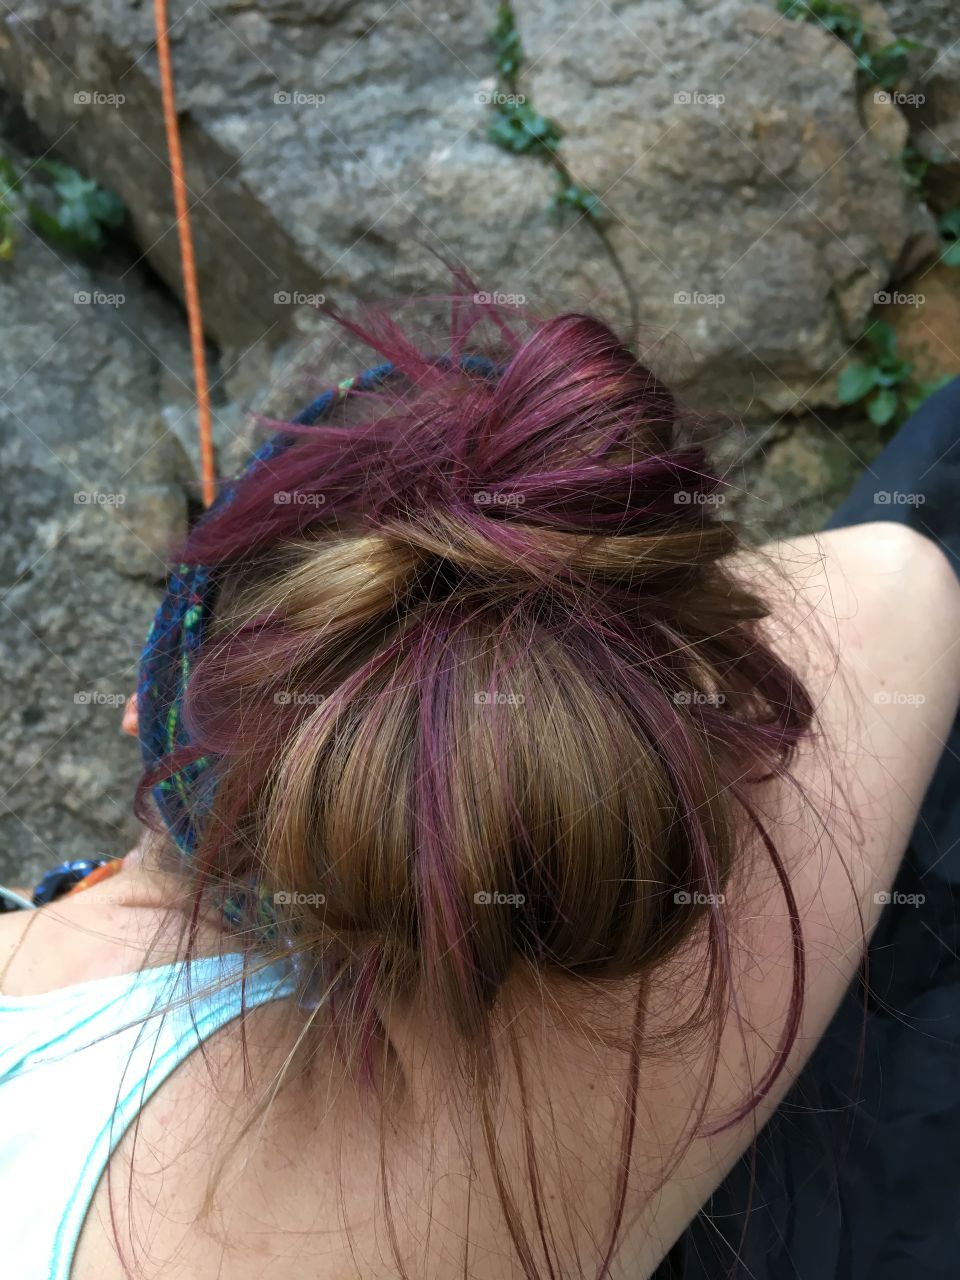 Dyed purple hair on a sport climber sitting outdoors on a mountain waiting to climb